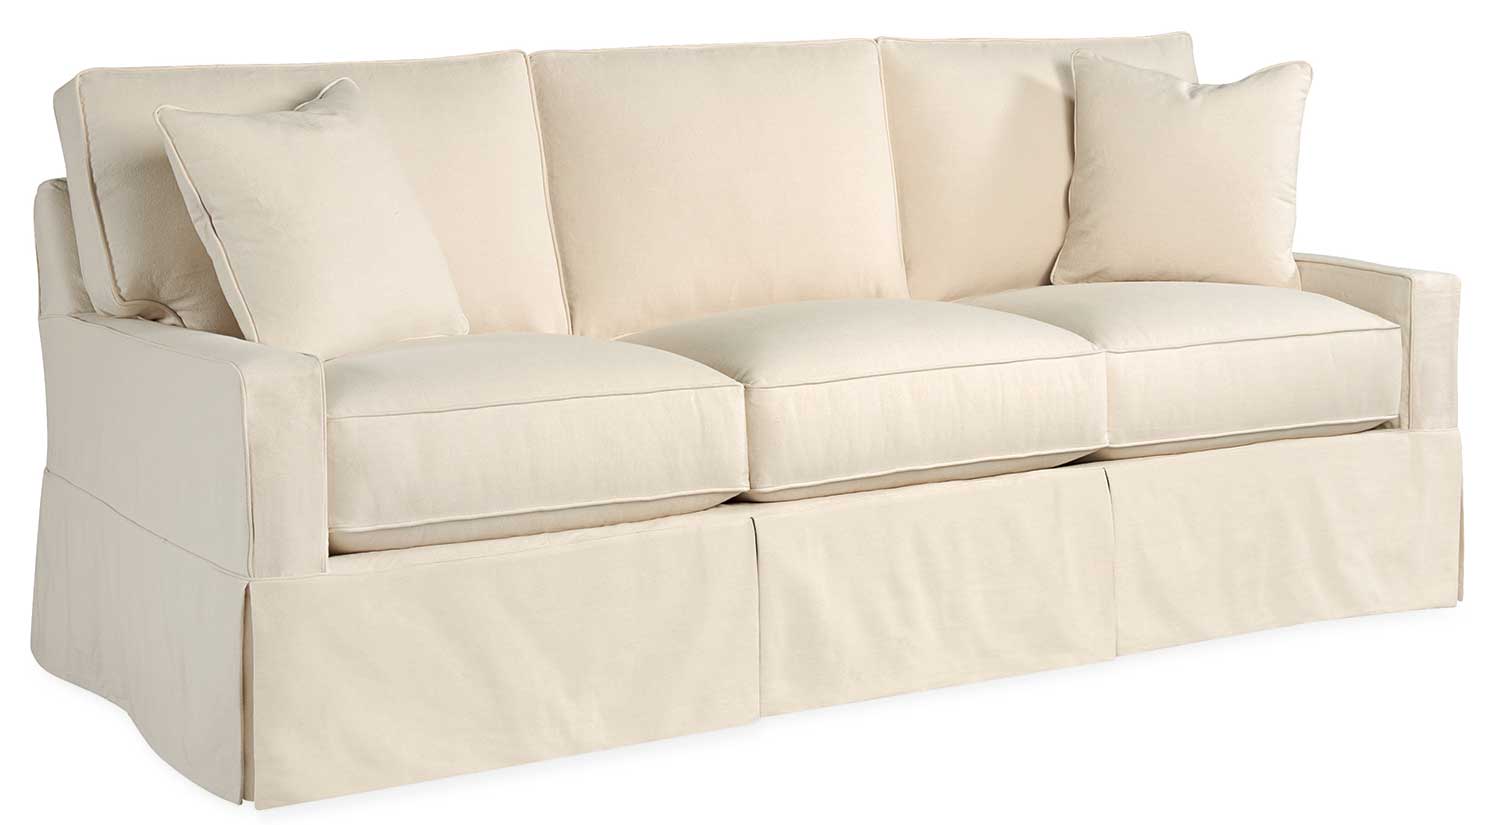 What Is A Slipcover Sofa